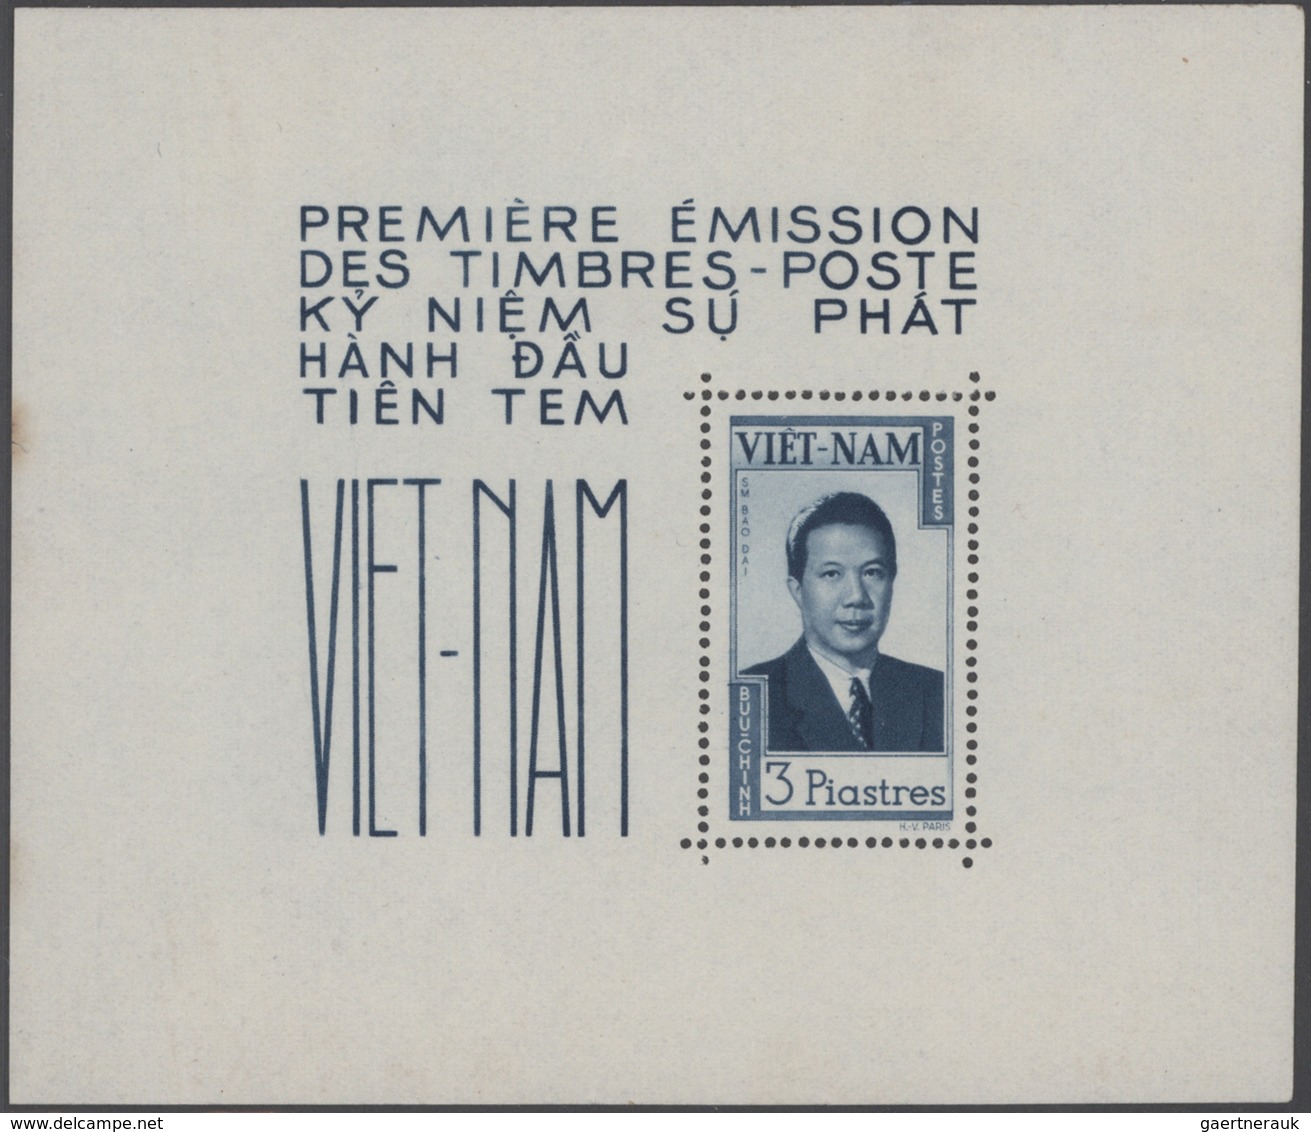 Vietnam-Süd (1951-1975): 1950/175 (ca.), South and North Vietnam, sophisticated balance on stockpage